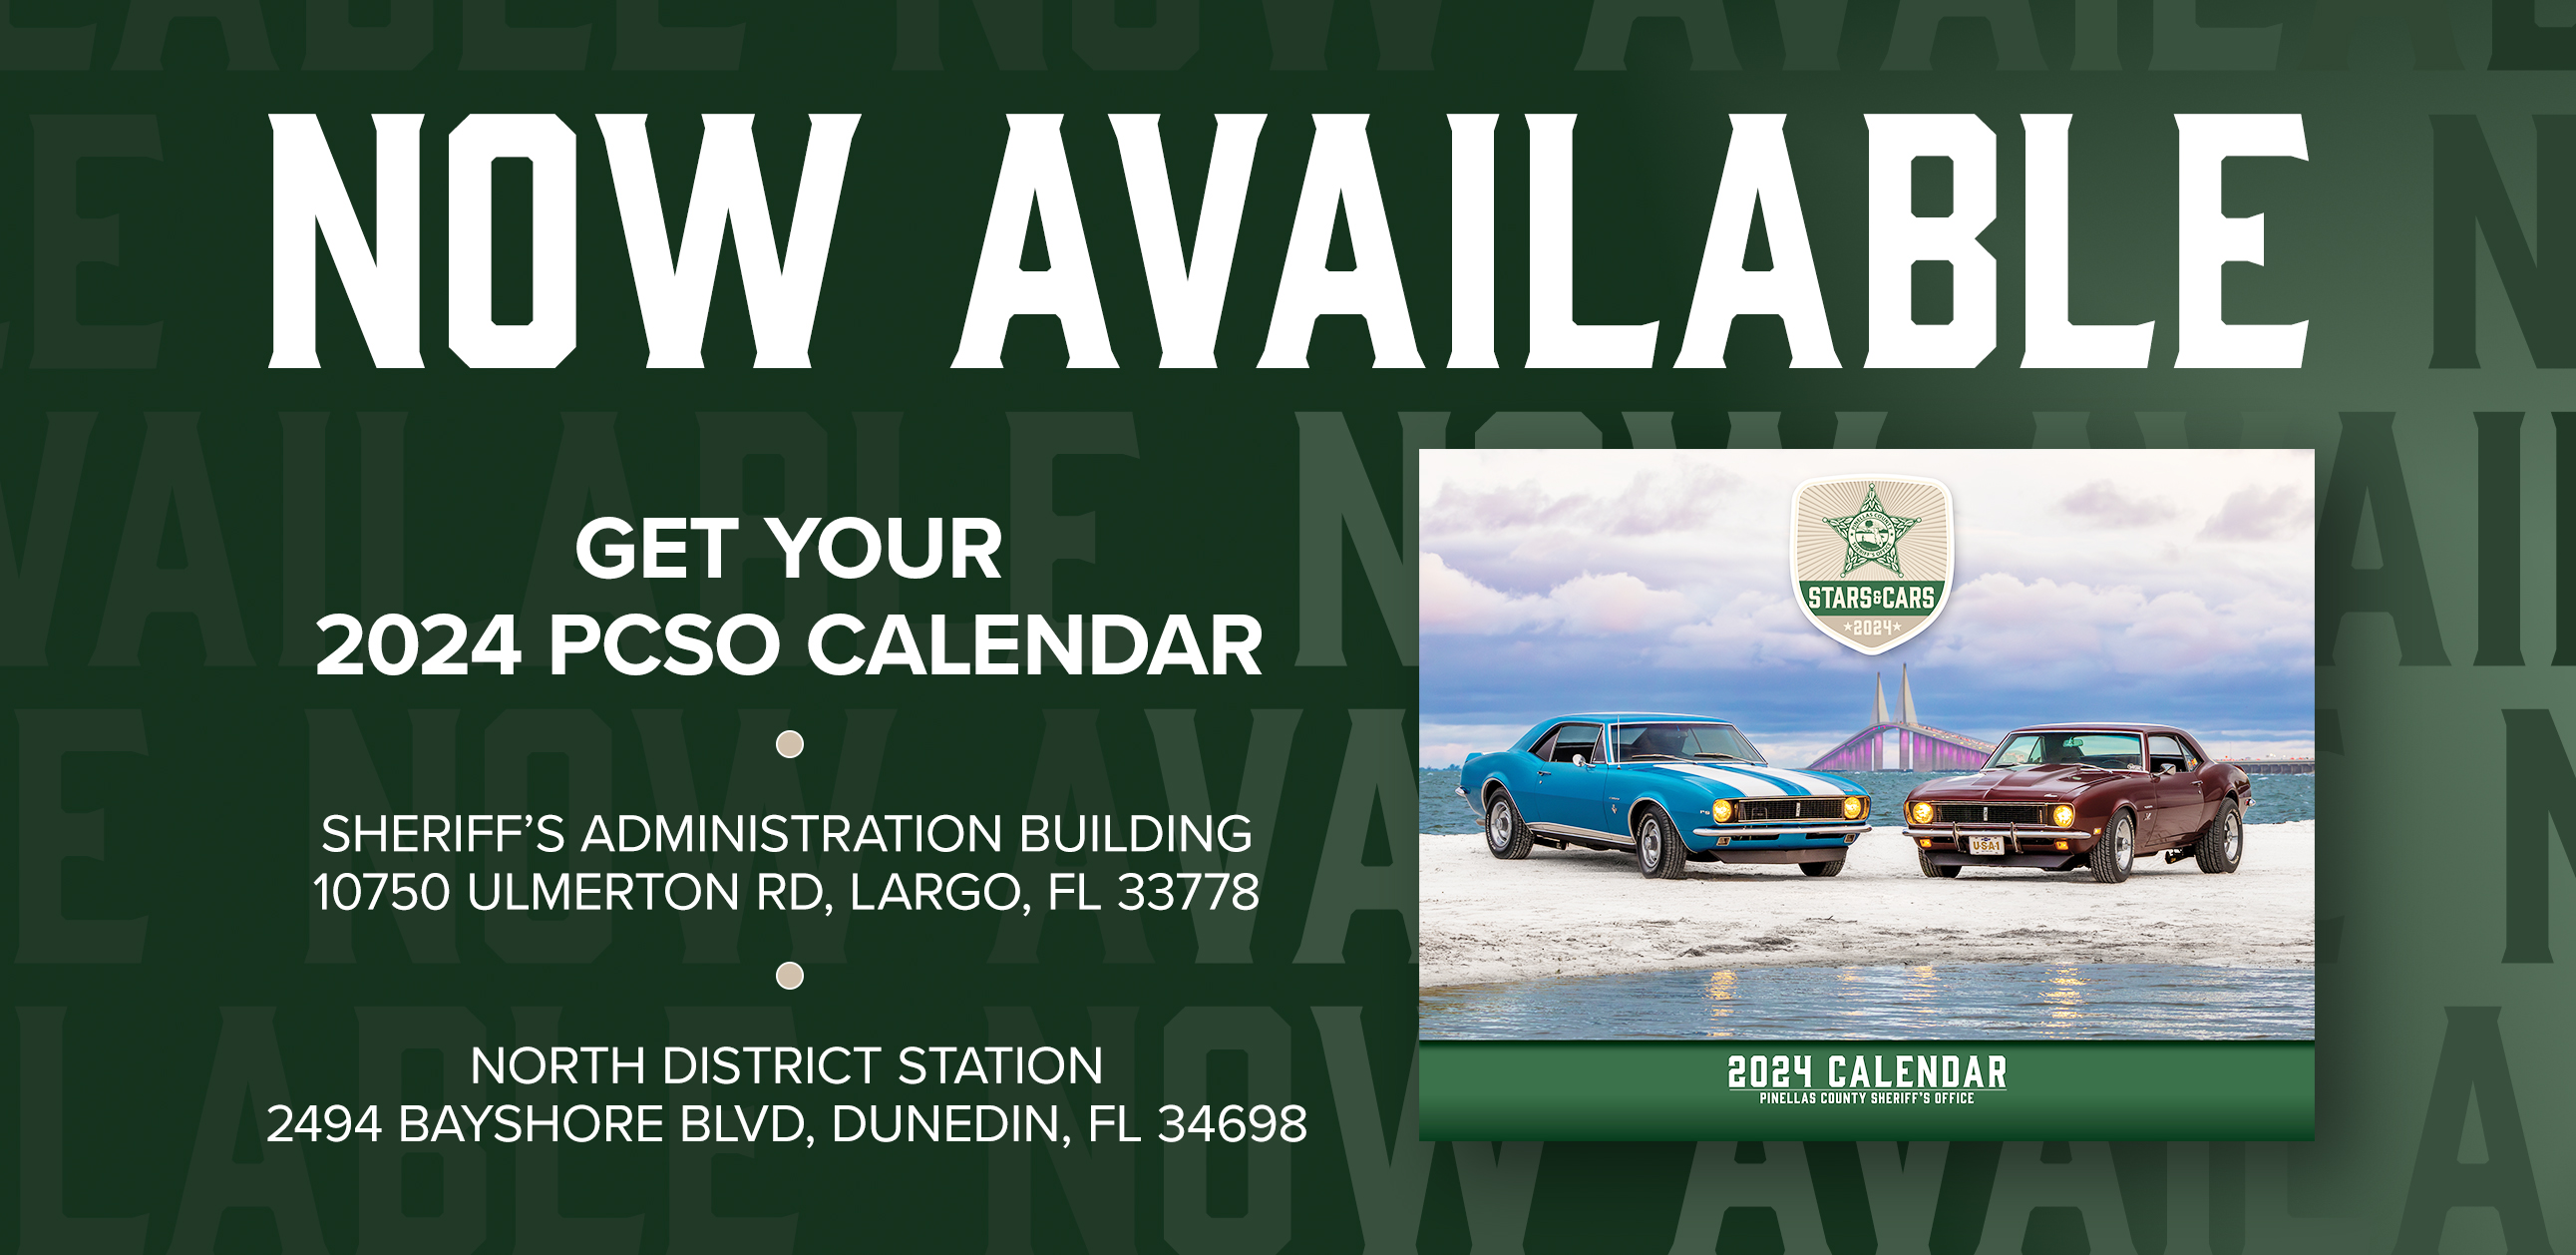 Now available, get your 2024 PCSO Calendar at the Sheriff's Administration Building or North District Station